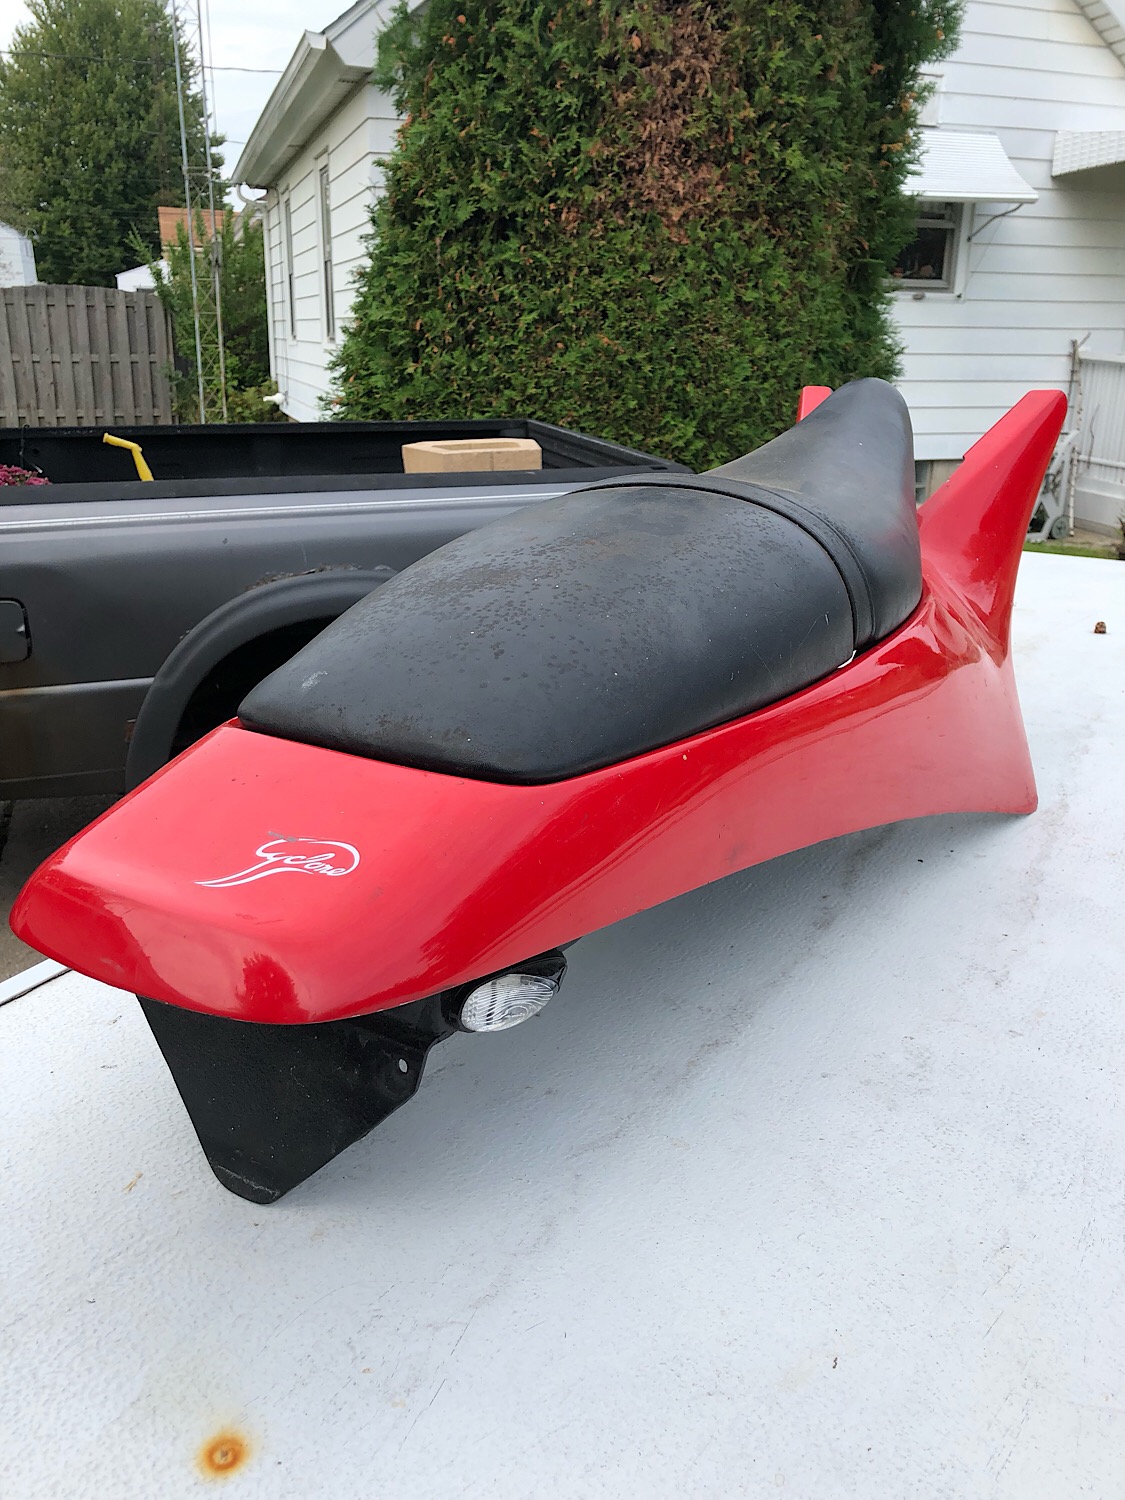 M2 Cyclone tail with Seat $100 plus shipping